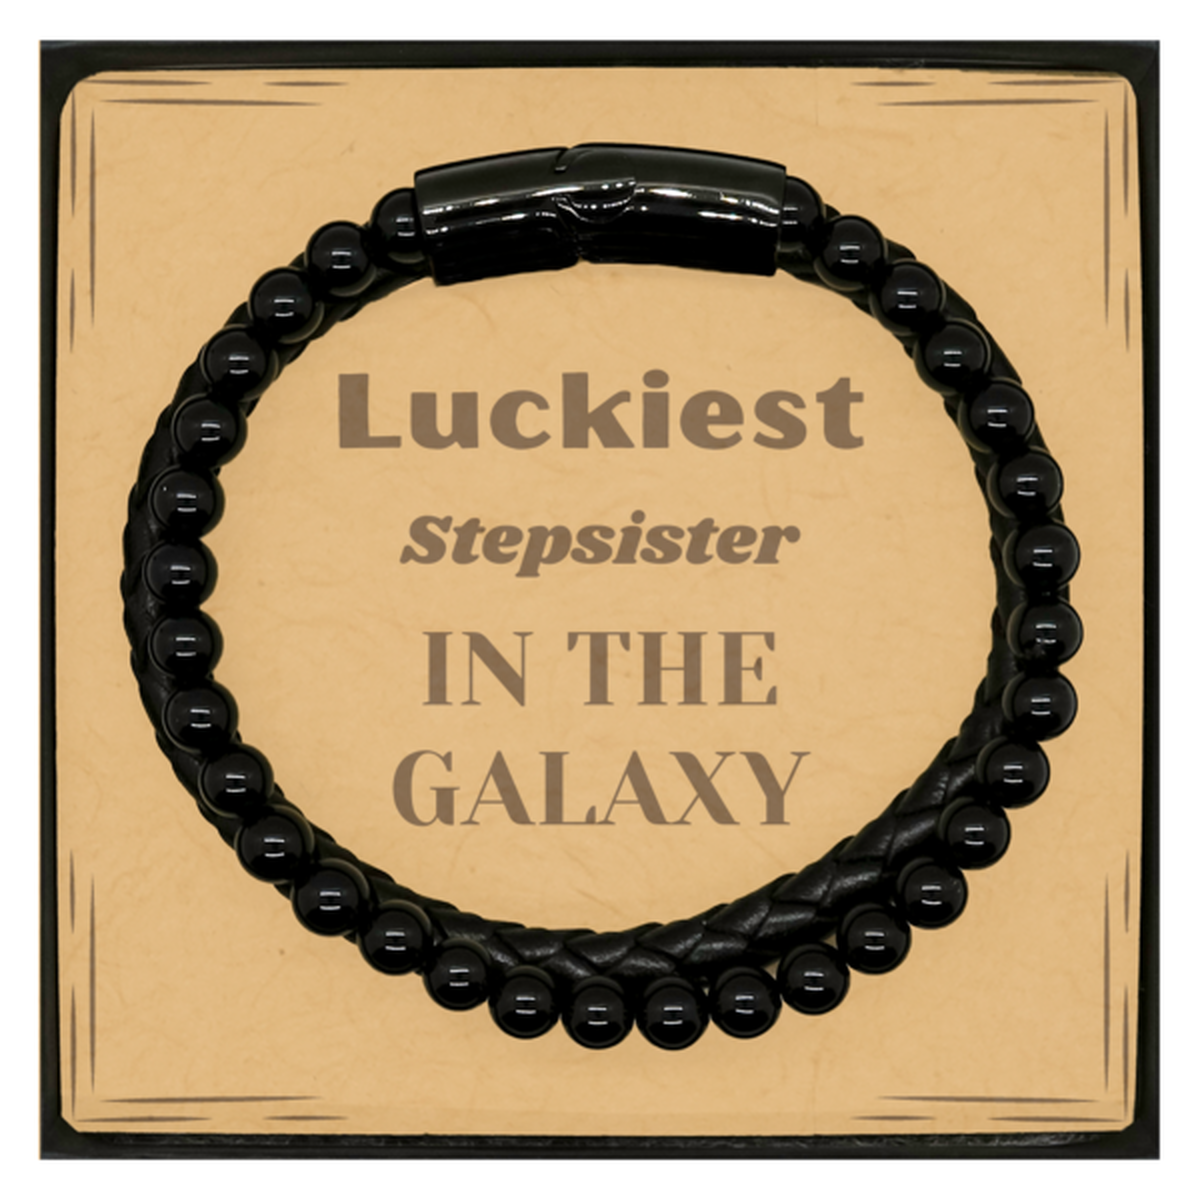 Luckiest Stepsister in the Galaxy, To My Stepsister Message Card Gifts, Christmas Stepsister Stone Leather Bracelets Gifts, X-mas Birthday Unique Gifts For Stepsister Men Women